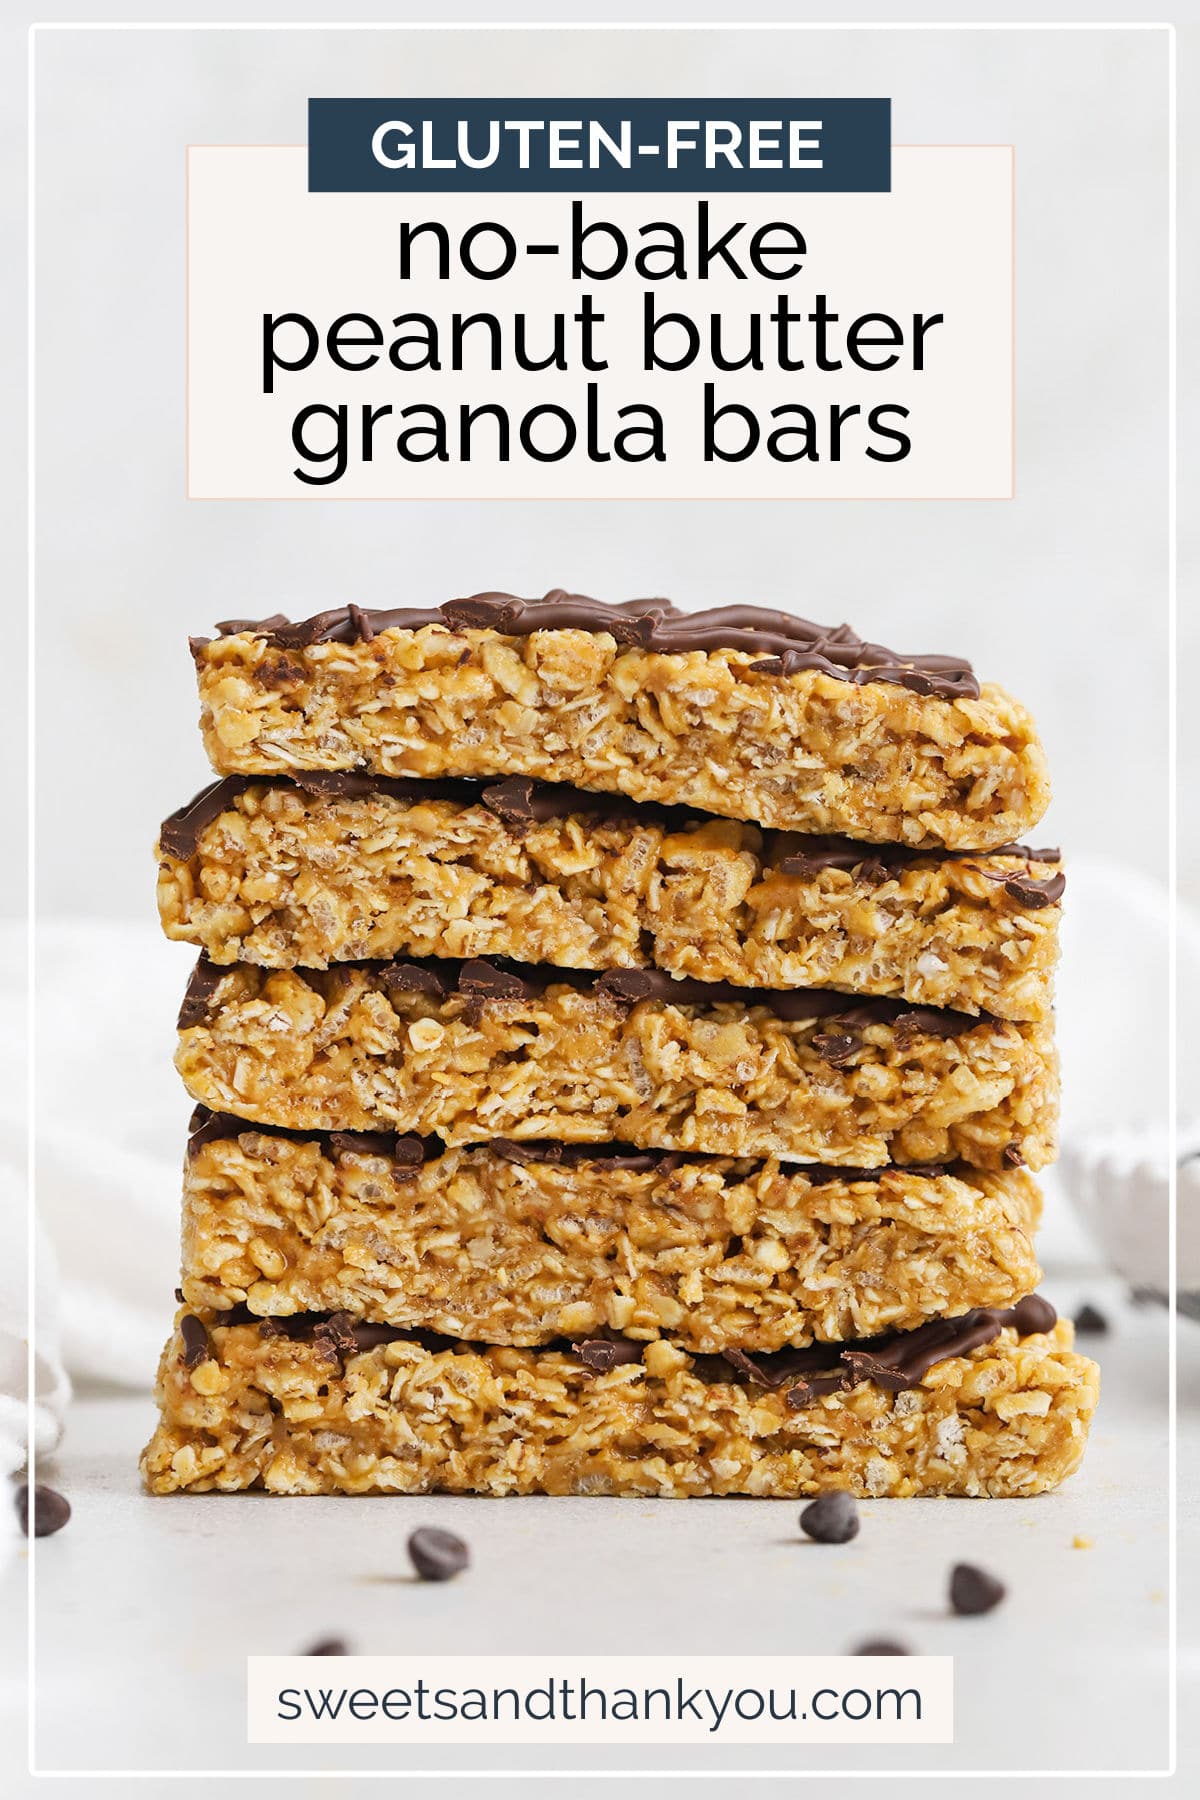 No-Bake Peanut Butter Granola Bars - These healthy homemade peanut butter granola bars are so easy and delicious! You only need a few ingredients & a few minutes to make them! (Gluten-Free, Vegan-Friendly) // soft peanut butter granola bars // healthy peanut butter granola bars // healthy granola bars // gluten-free granola bars // homemade granola bars recipe // soft granola bars // gluten-free snack // healthy snack // chocolate peanut butter granola bars // sweets and thank you granola bars